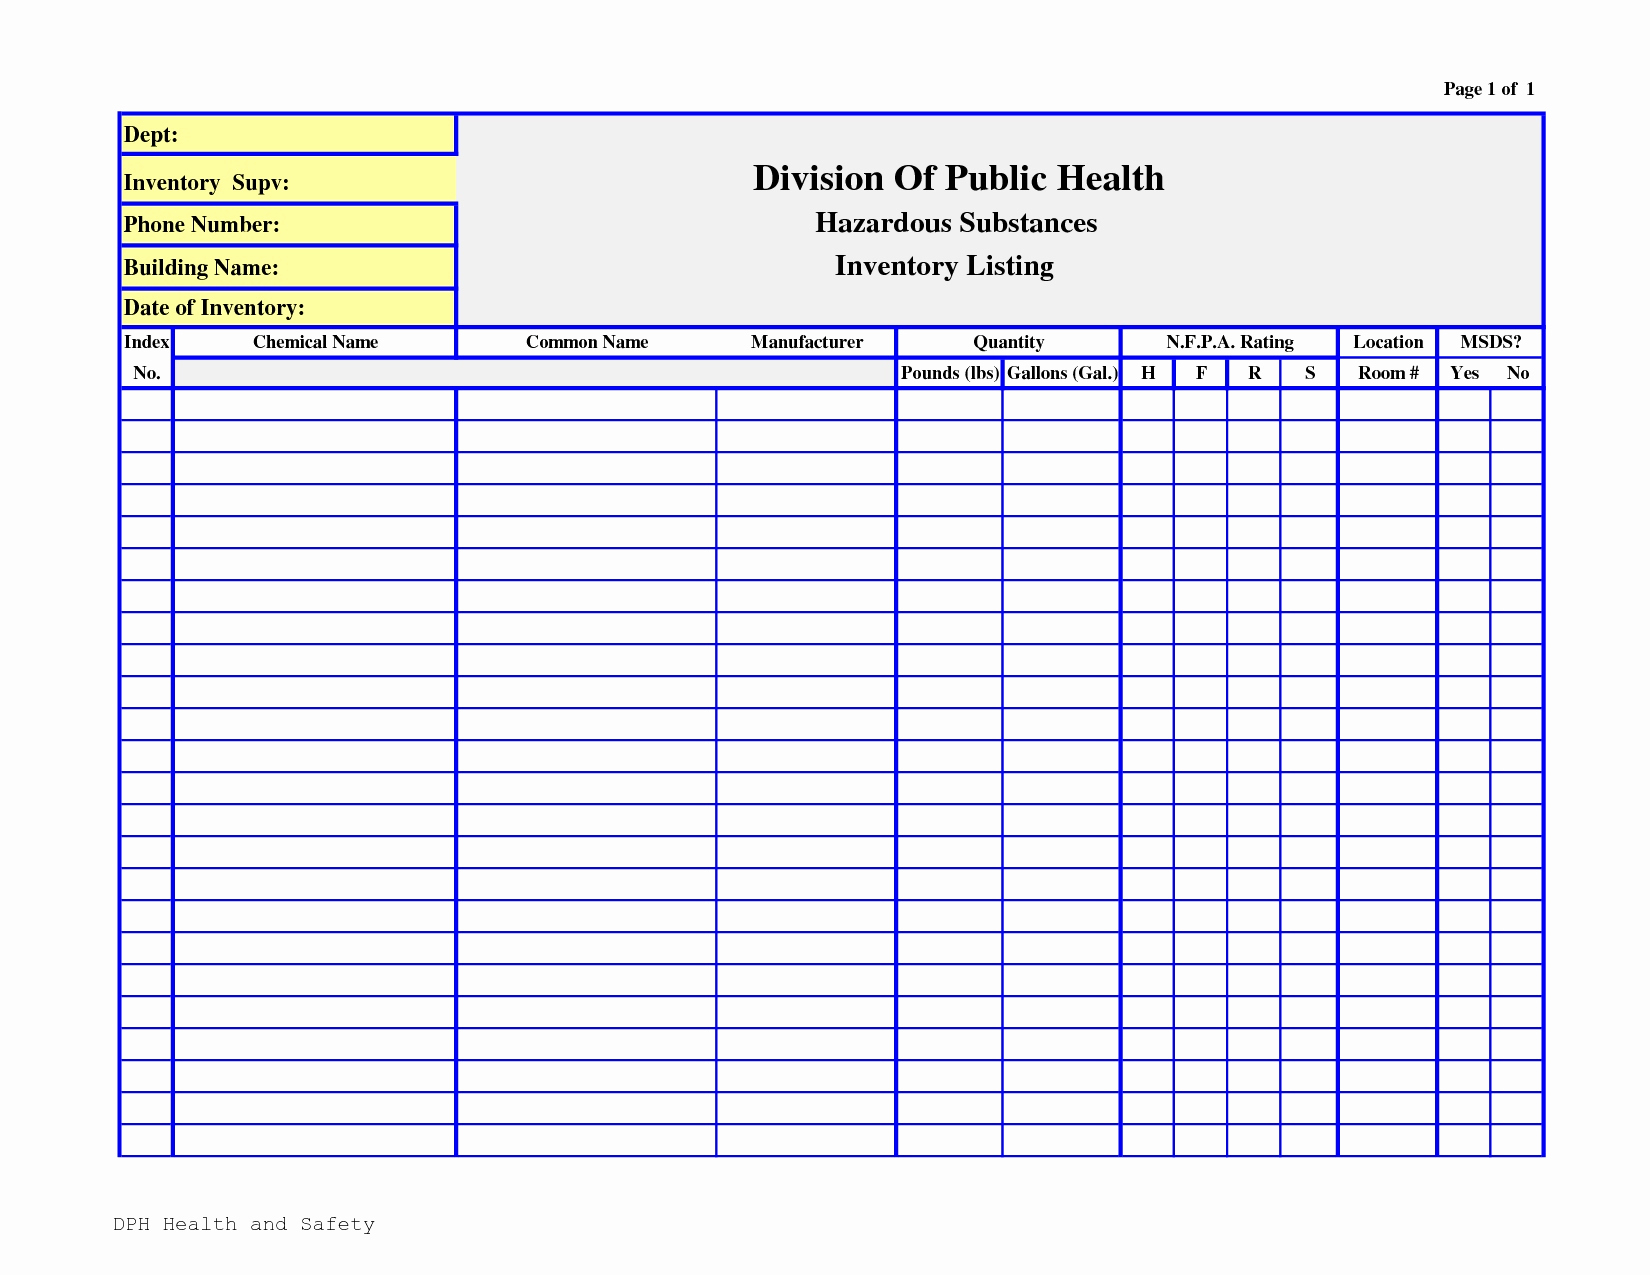 Downtime Tracker Excel Template Beautiful Downtime Tracker Excel And Safety Tracking Spreadsheet